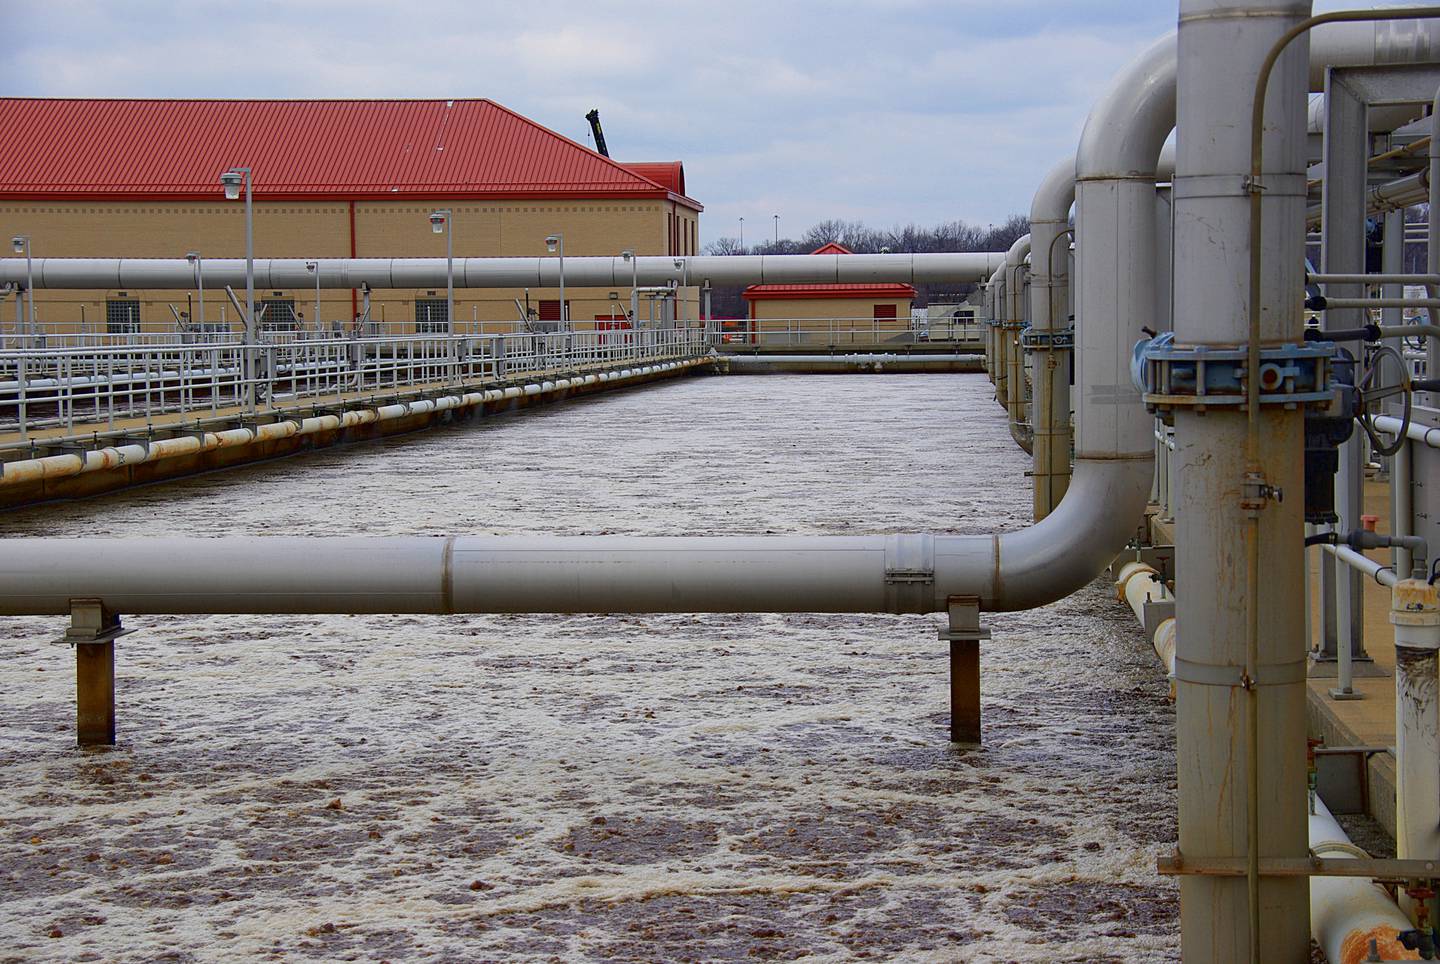 Wastewater at Back River Wastewater Treatment Plant near Baltimore.